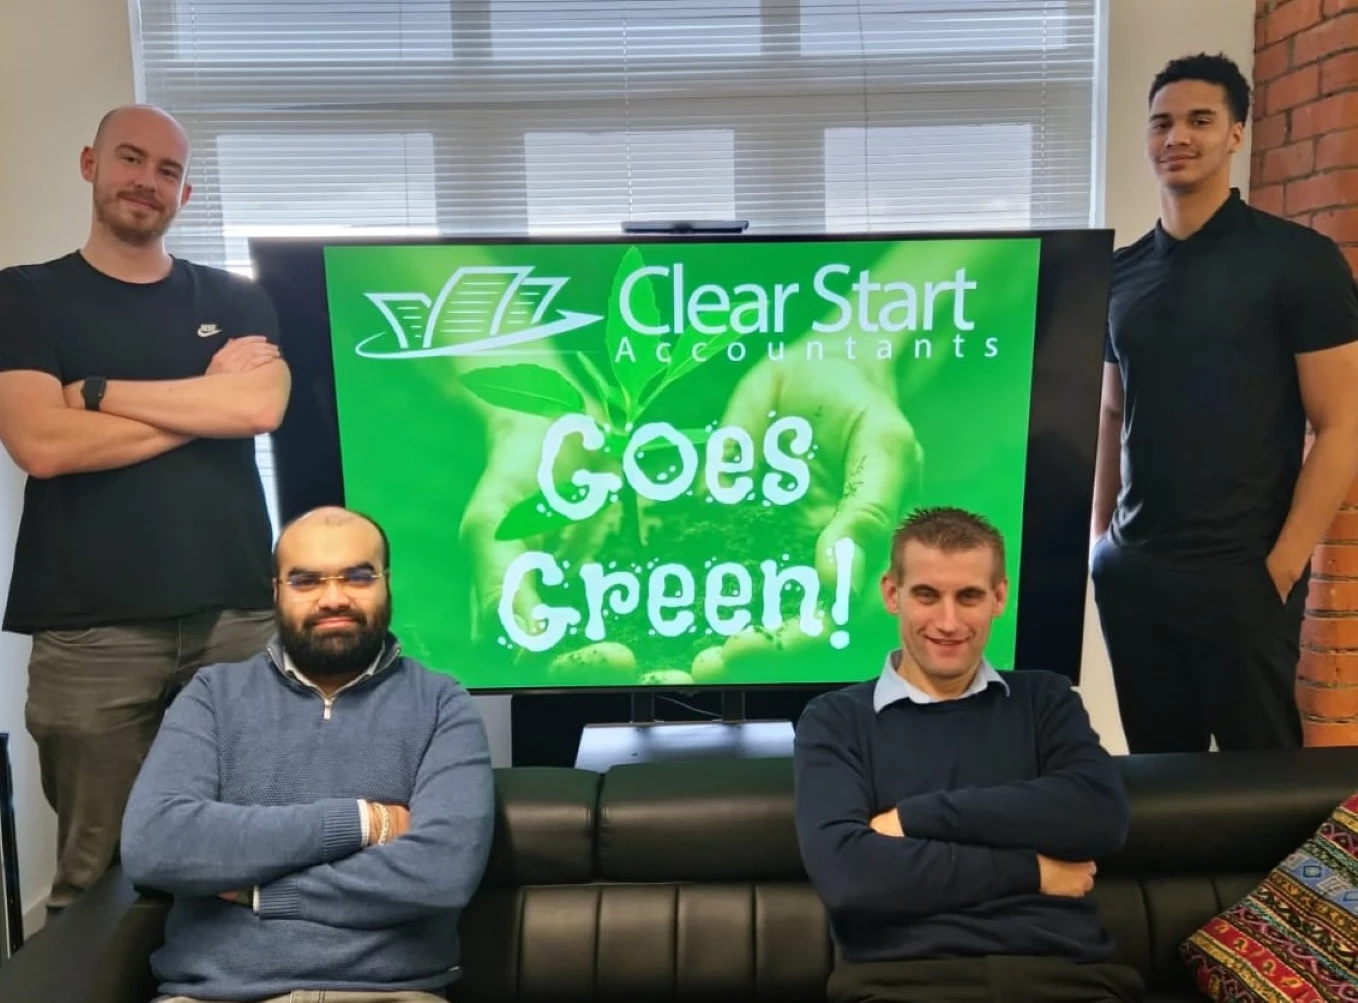 Clear Start Accountants Commits to Going Green 